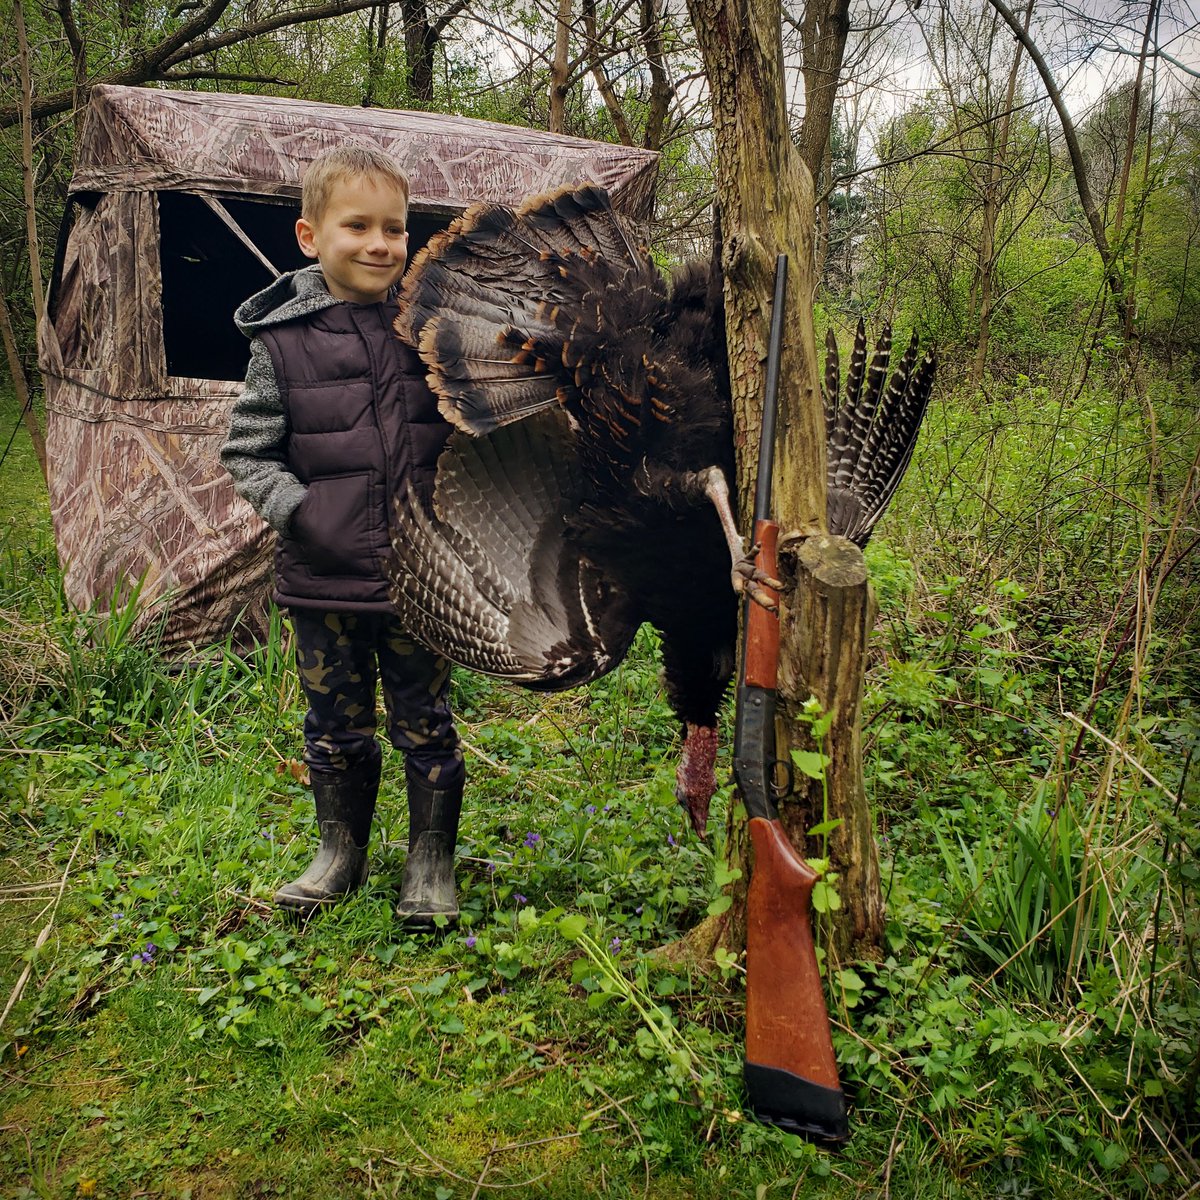 Little man is satisfied 🦃 📸 Michael Tepe #fallobsession #fallobsessed #turkey #turkeyhunting #turkeyhunter #springturkey #youthhunt #youthhunting #takekidhunting #gobbler #thunderchicken #cantstoptheflop